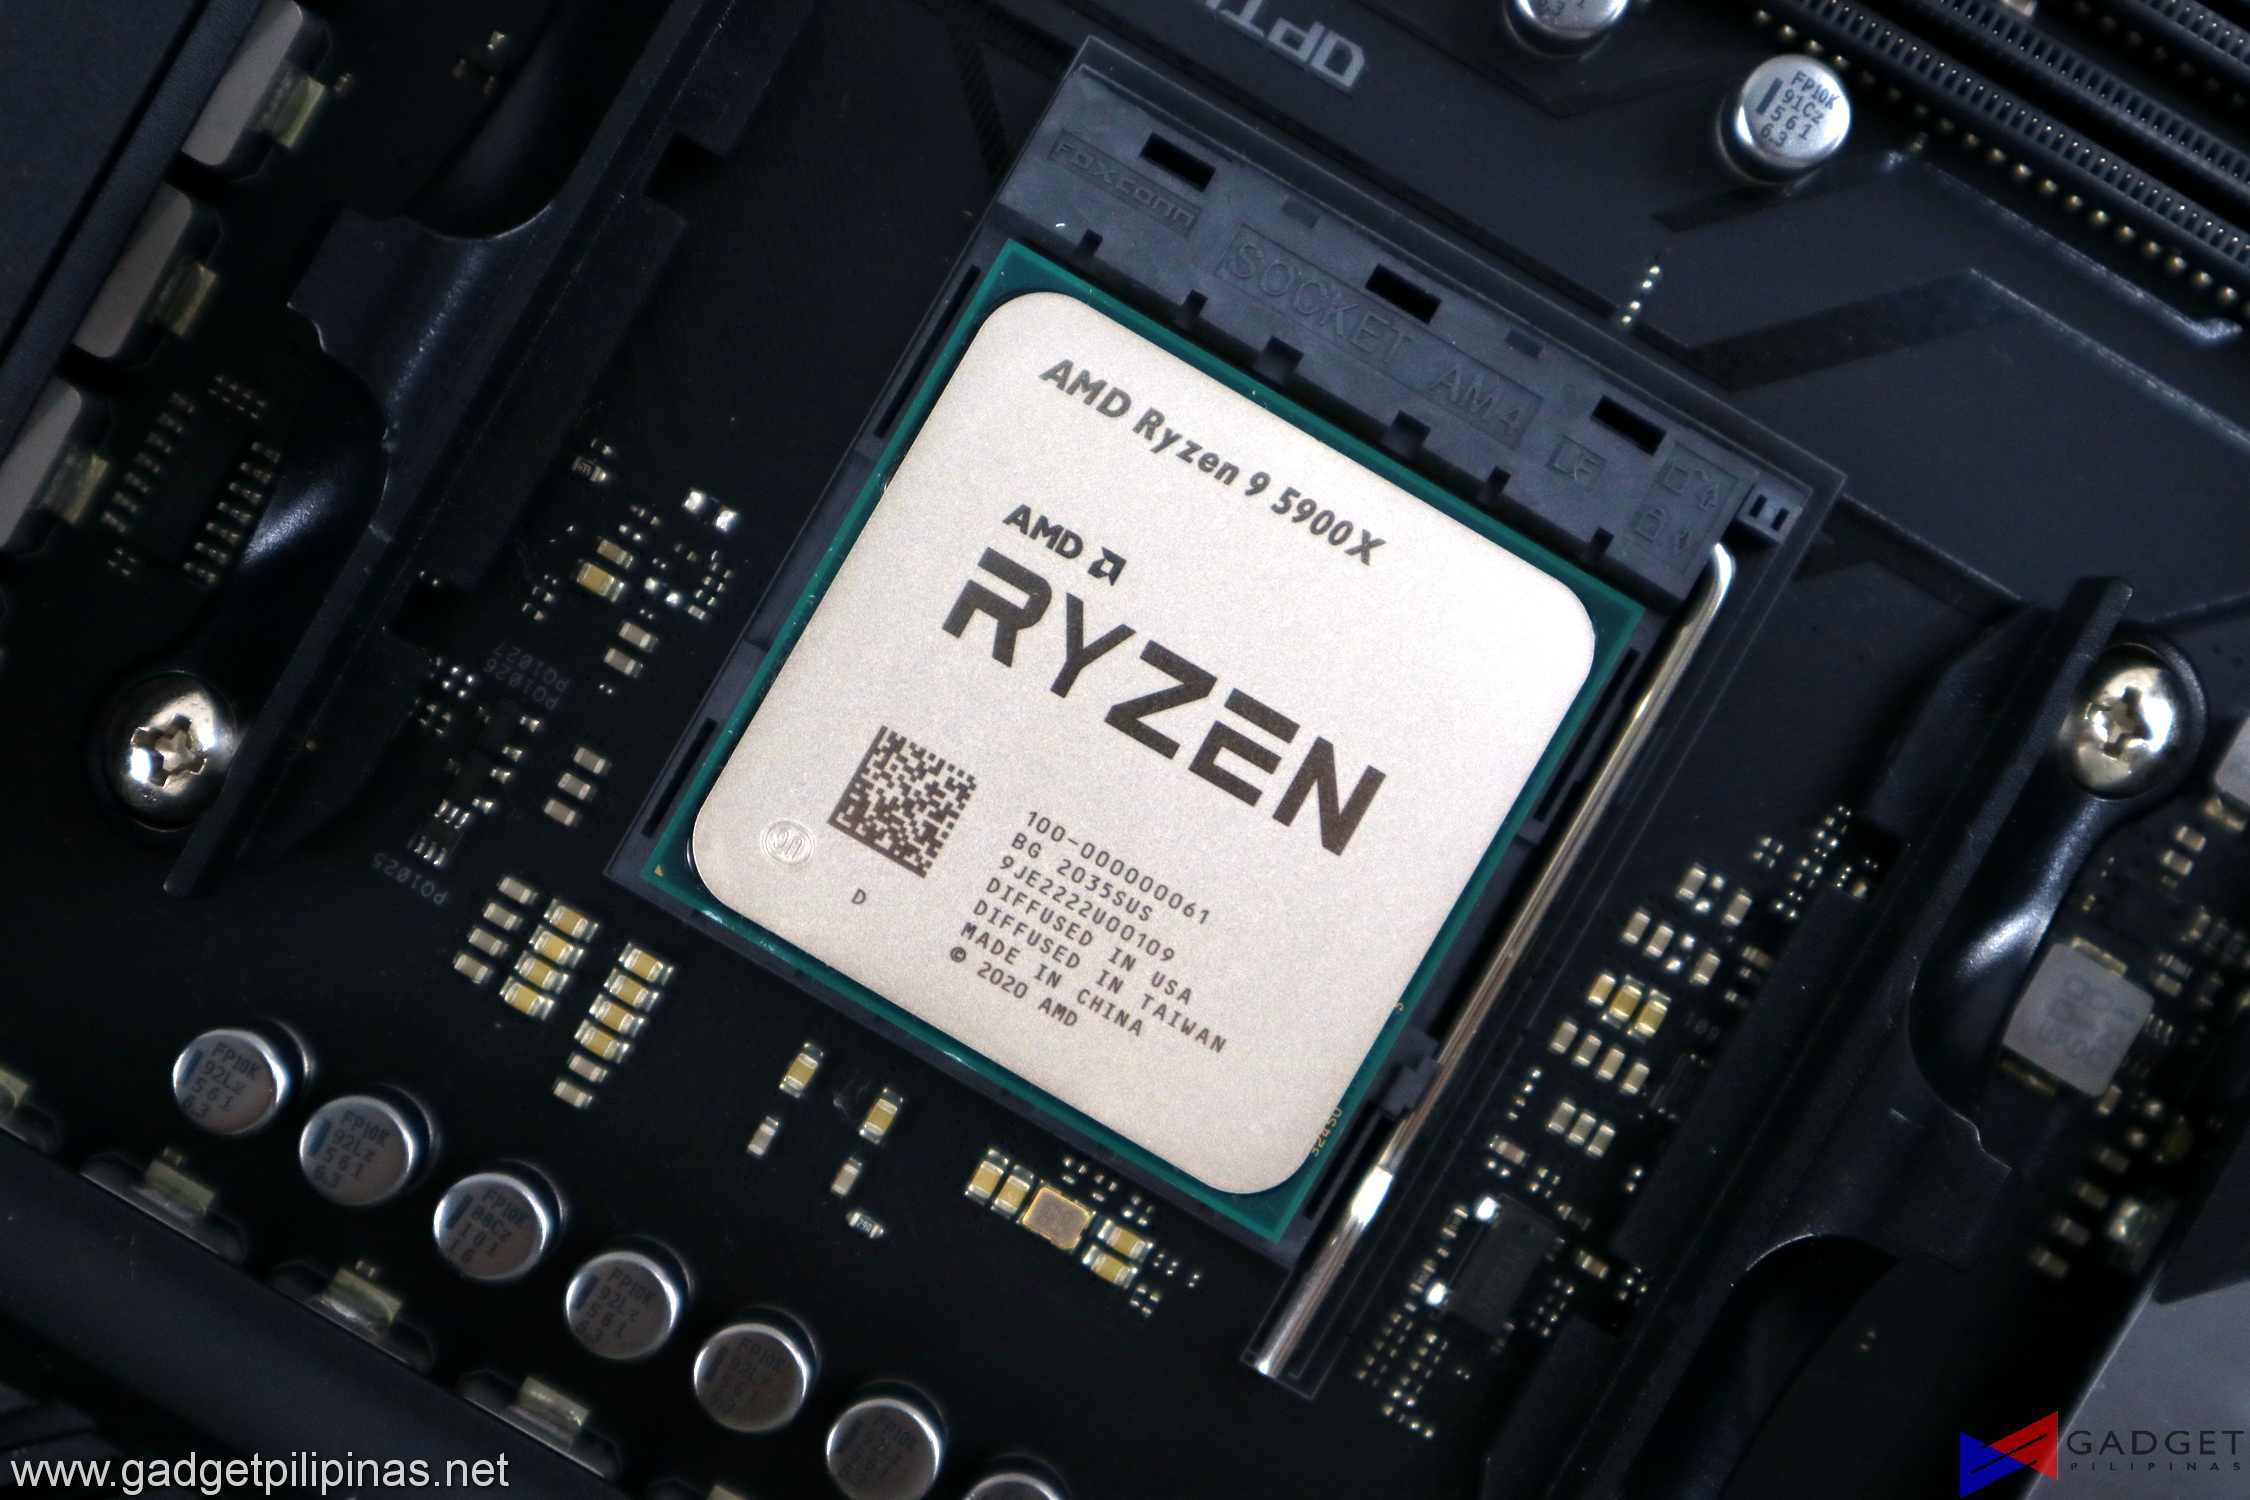 AMD Ryzen 9 5950X Processor Review – Simply the Fastest Gaming and Productivity CPU